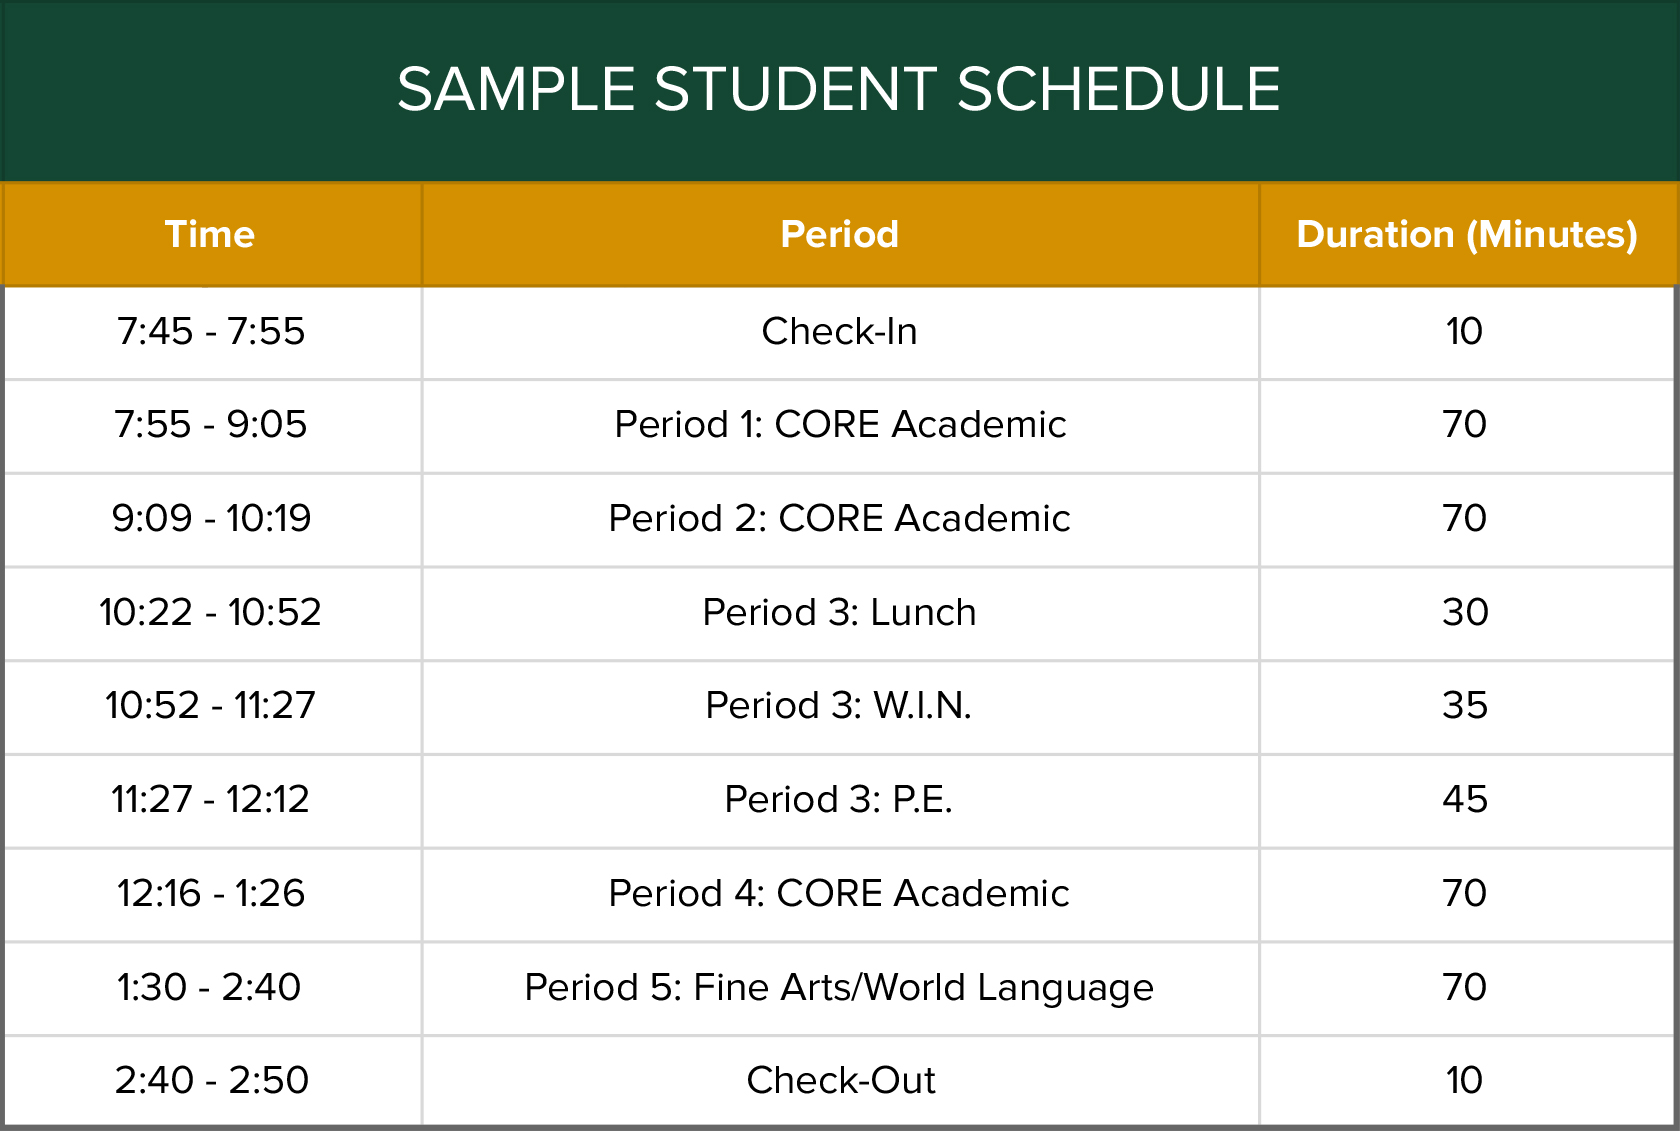 Student Schedule Sample for Web Friendship